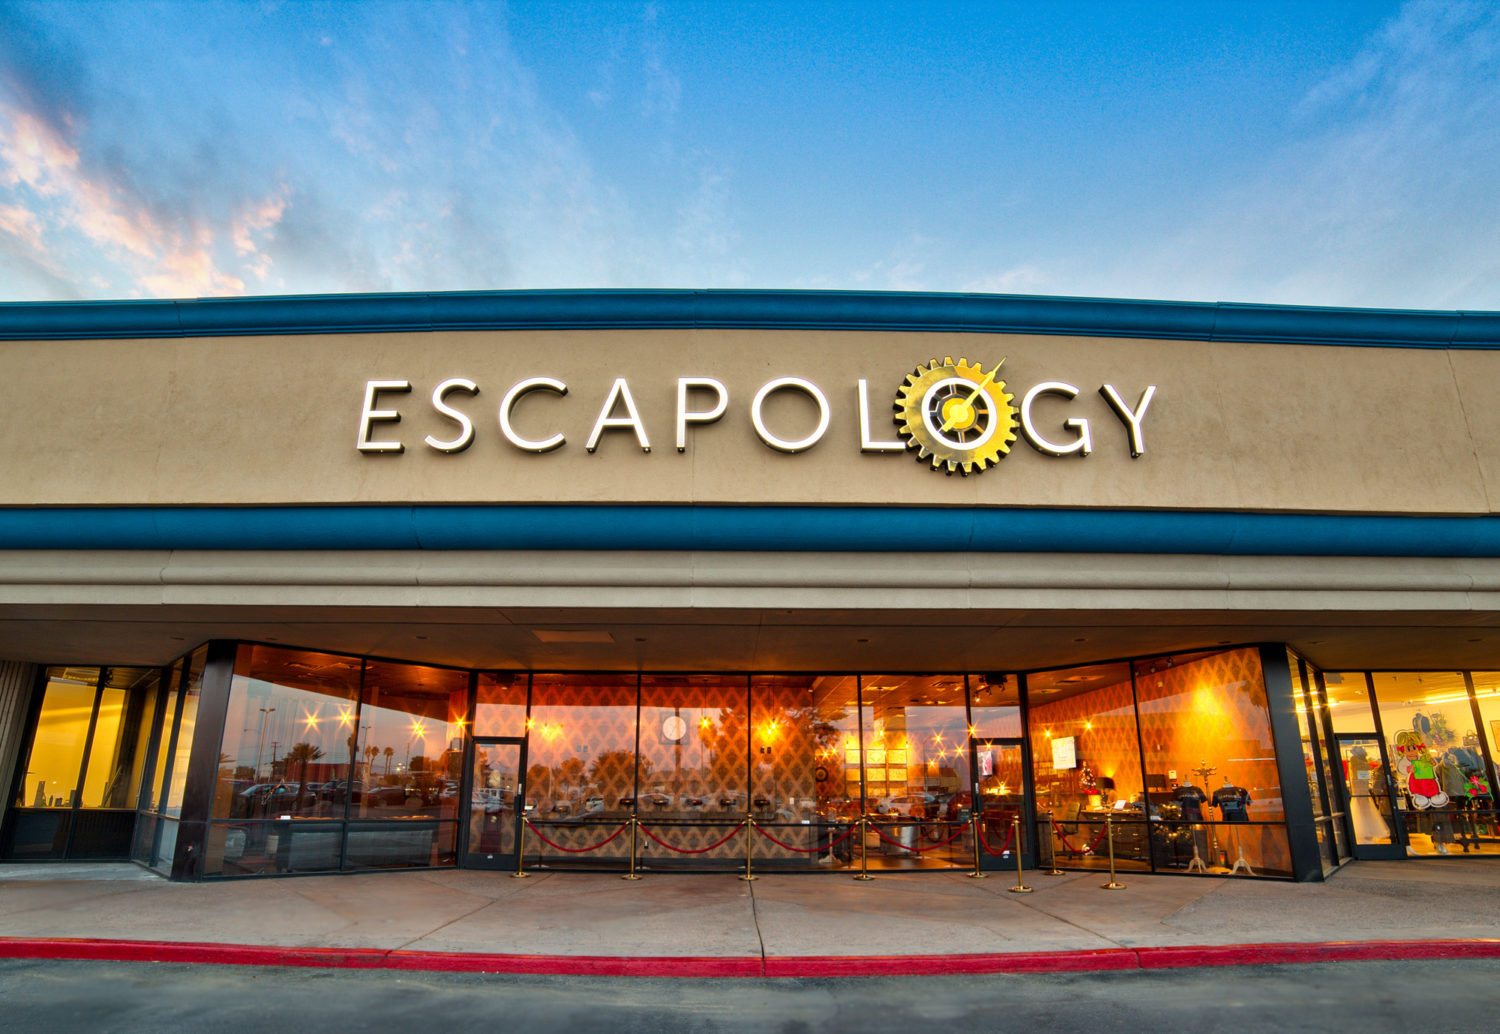 Escapology, the U.S. market leader in escape games, opened a flagship 10-game venue at 2797 S. Maryland Parkway in Las Vegas.